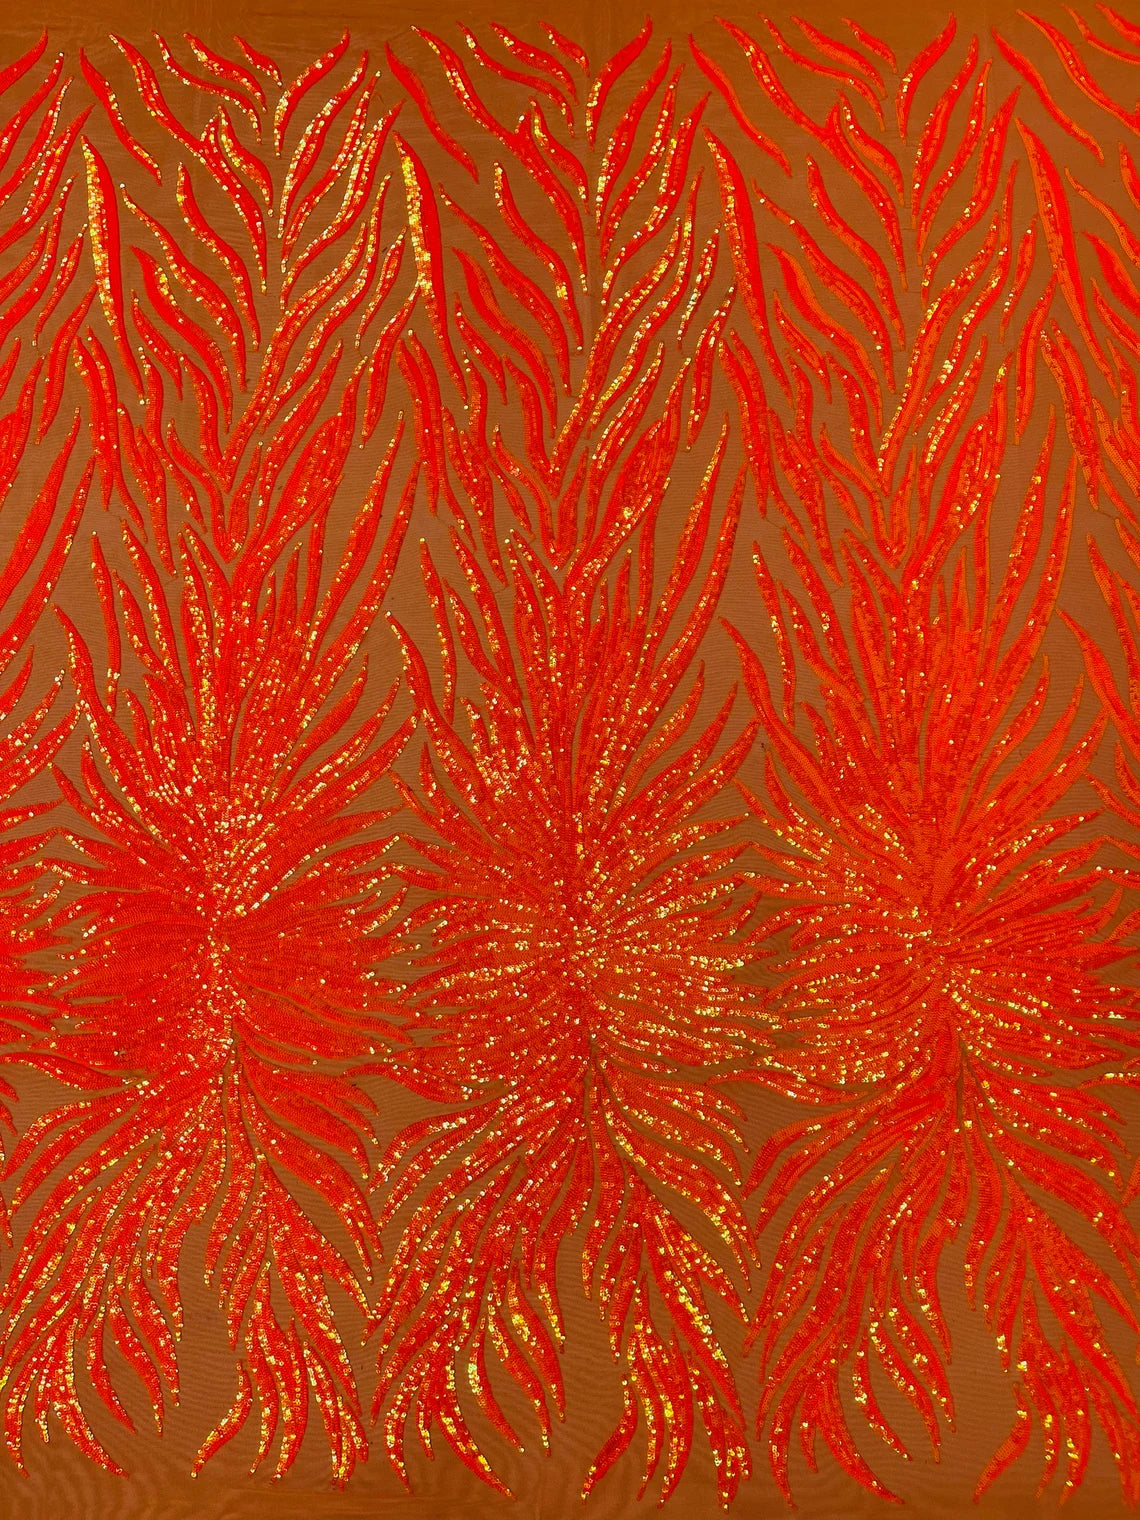 Wings Design Sequins Fabric - Iridescent Orange - 4 Way Stretch Wings Pattern Sequins Fabric By Yard